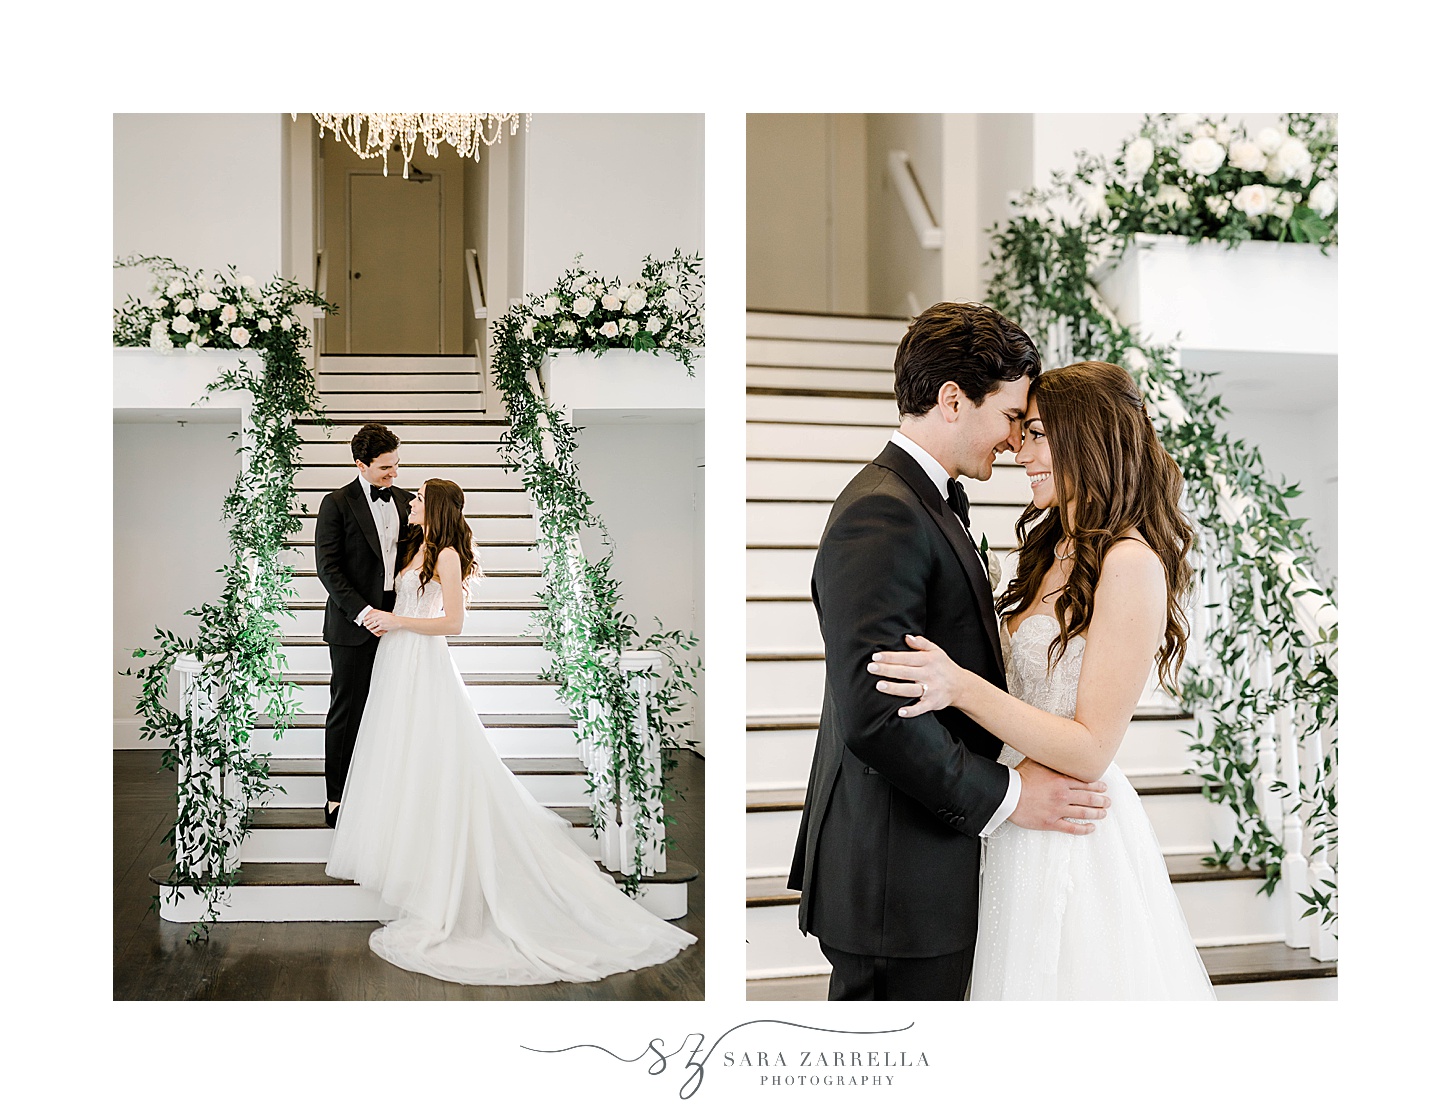 bride and groom hug by staircase with greenery on railing